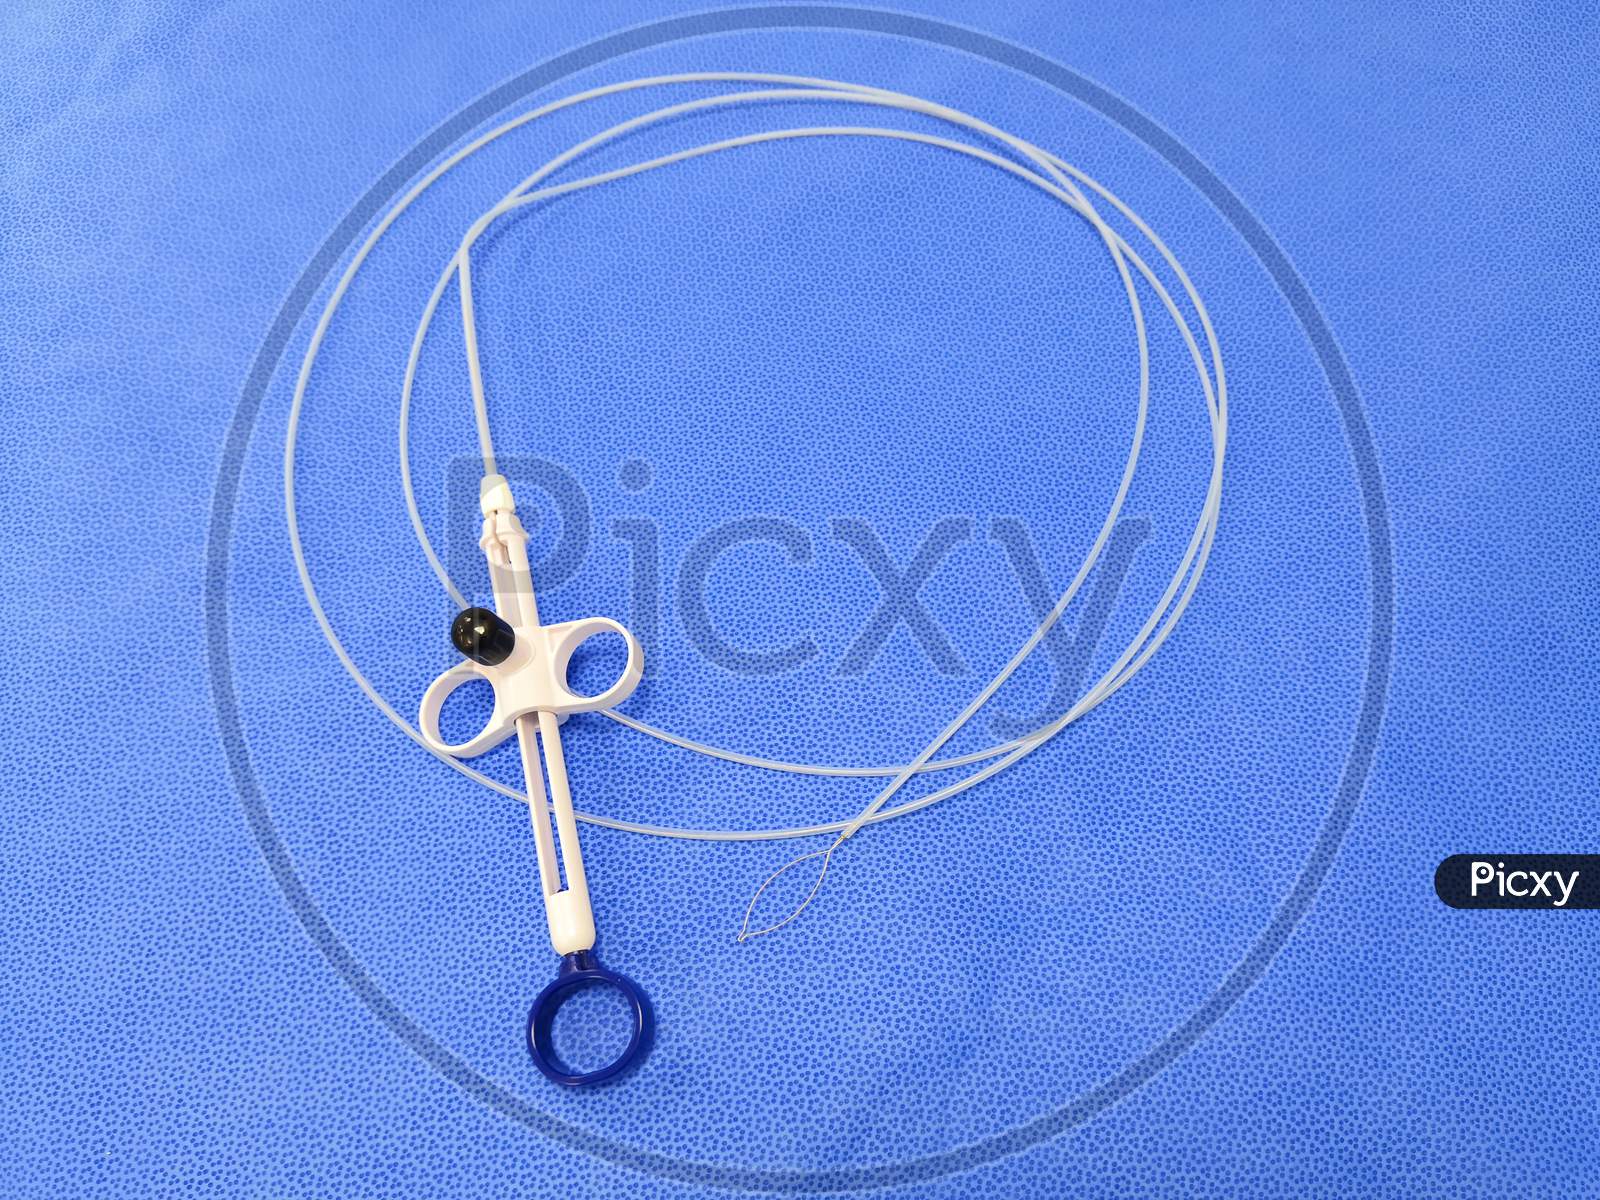 Endoscopic Instrument Polypectomy Snare In Blue Background. Selective Focus